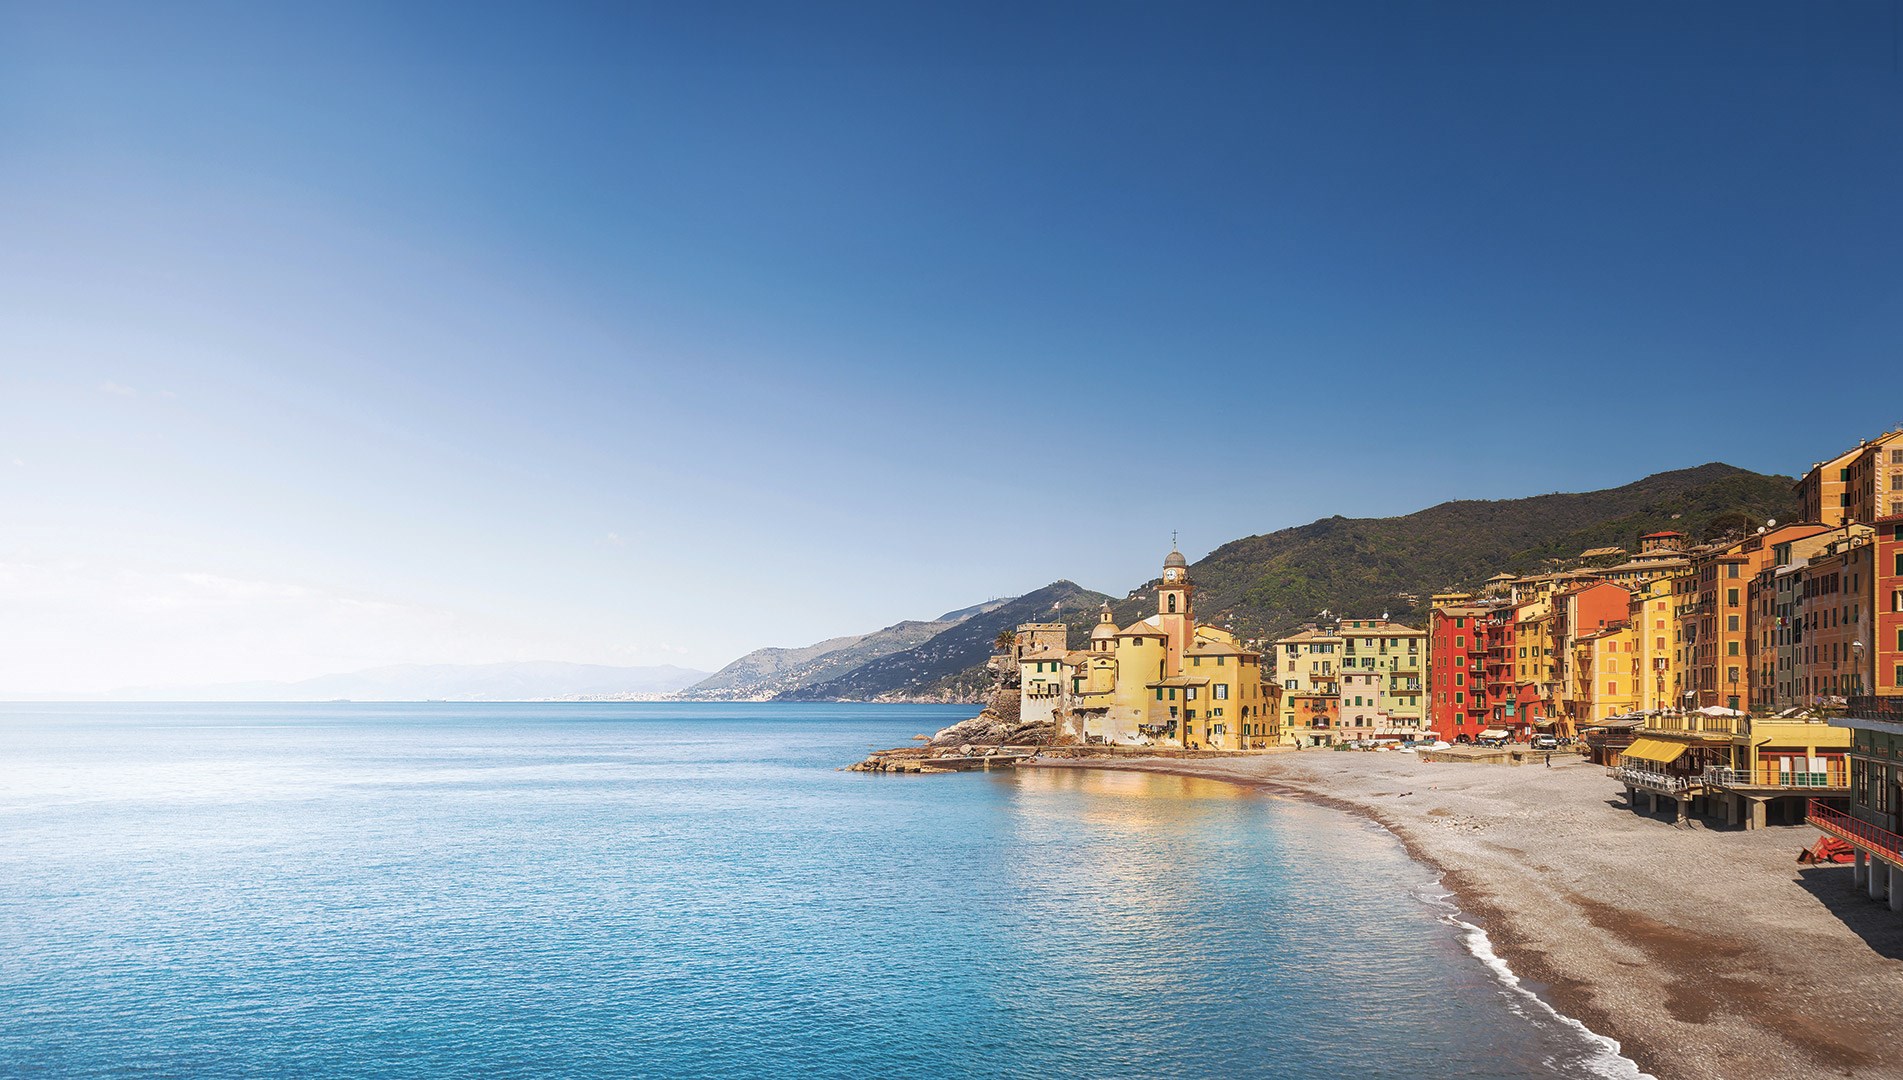 Events in Camogli for summer 2023